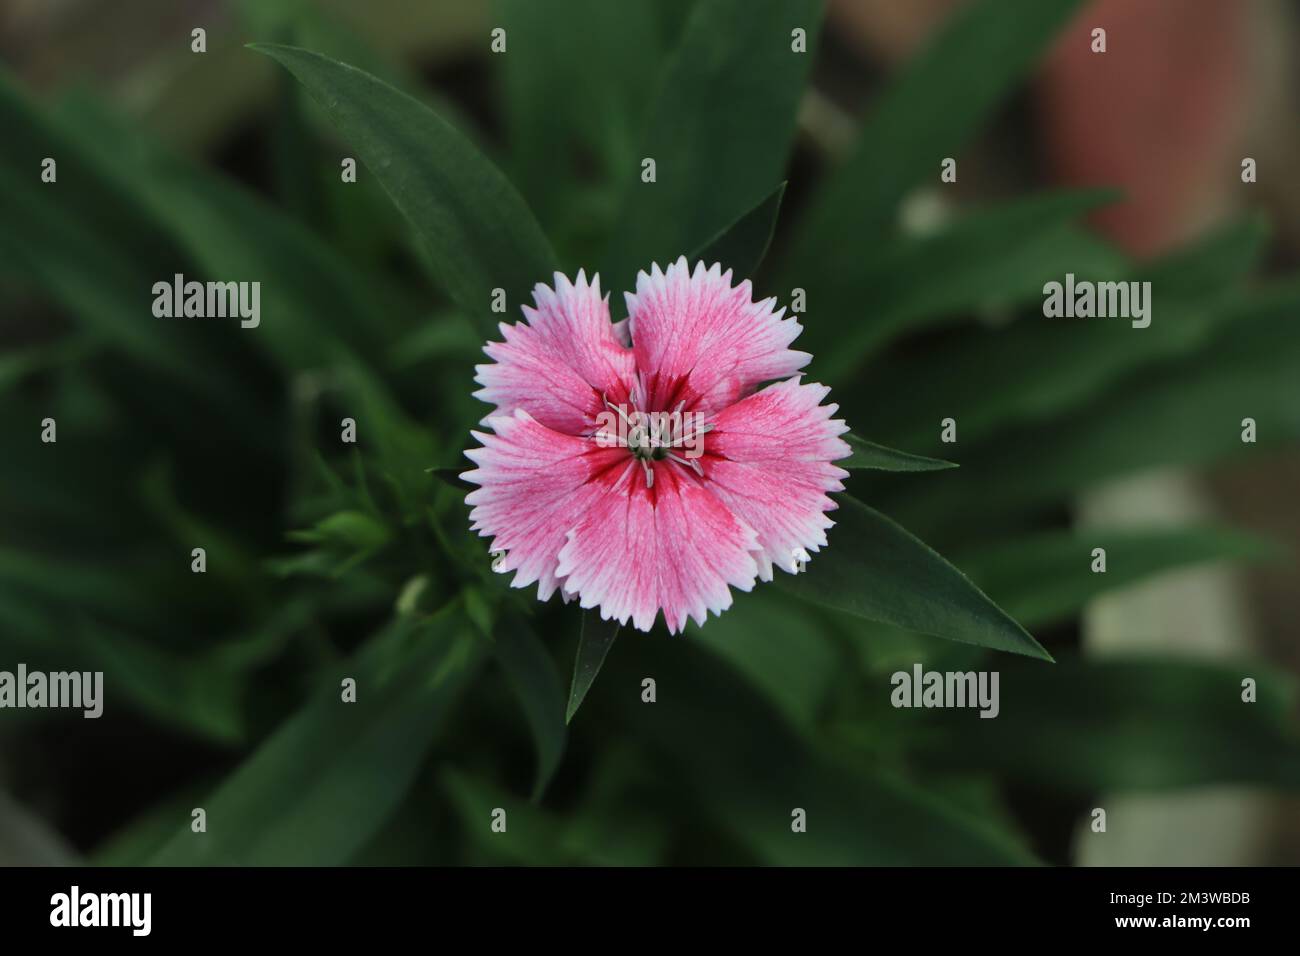 Dianthus plumarius or cultivar 'Ipswich Pinks' flowers with blue green leaves are popular garden plant. Stock Photo